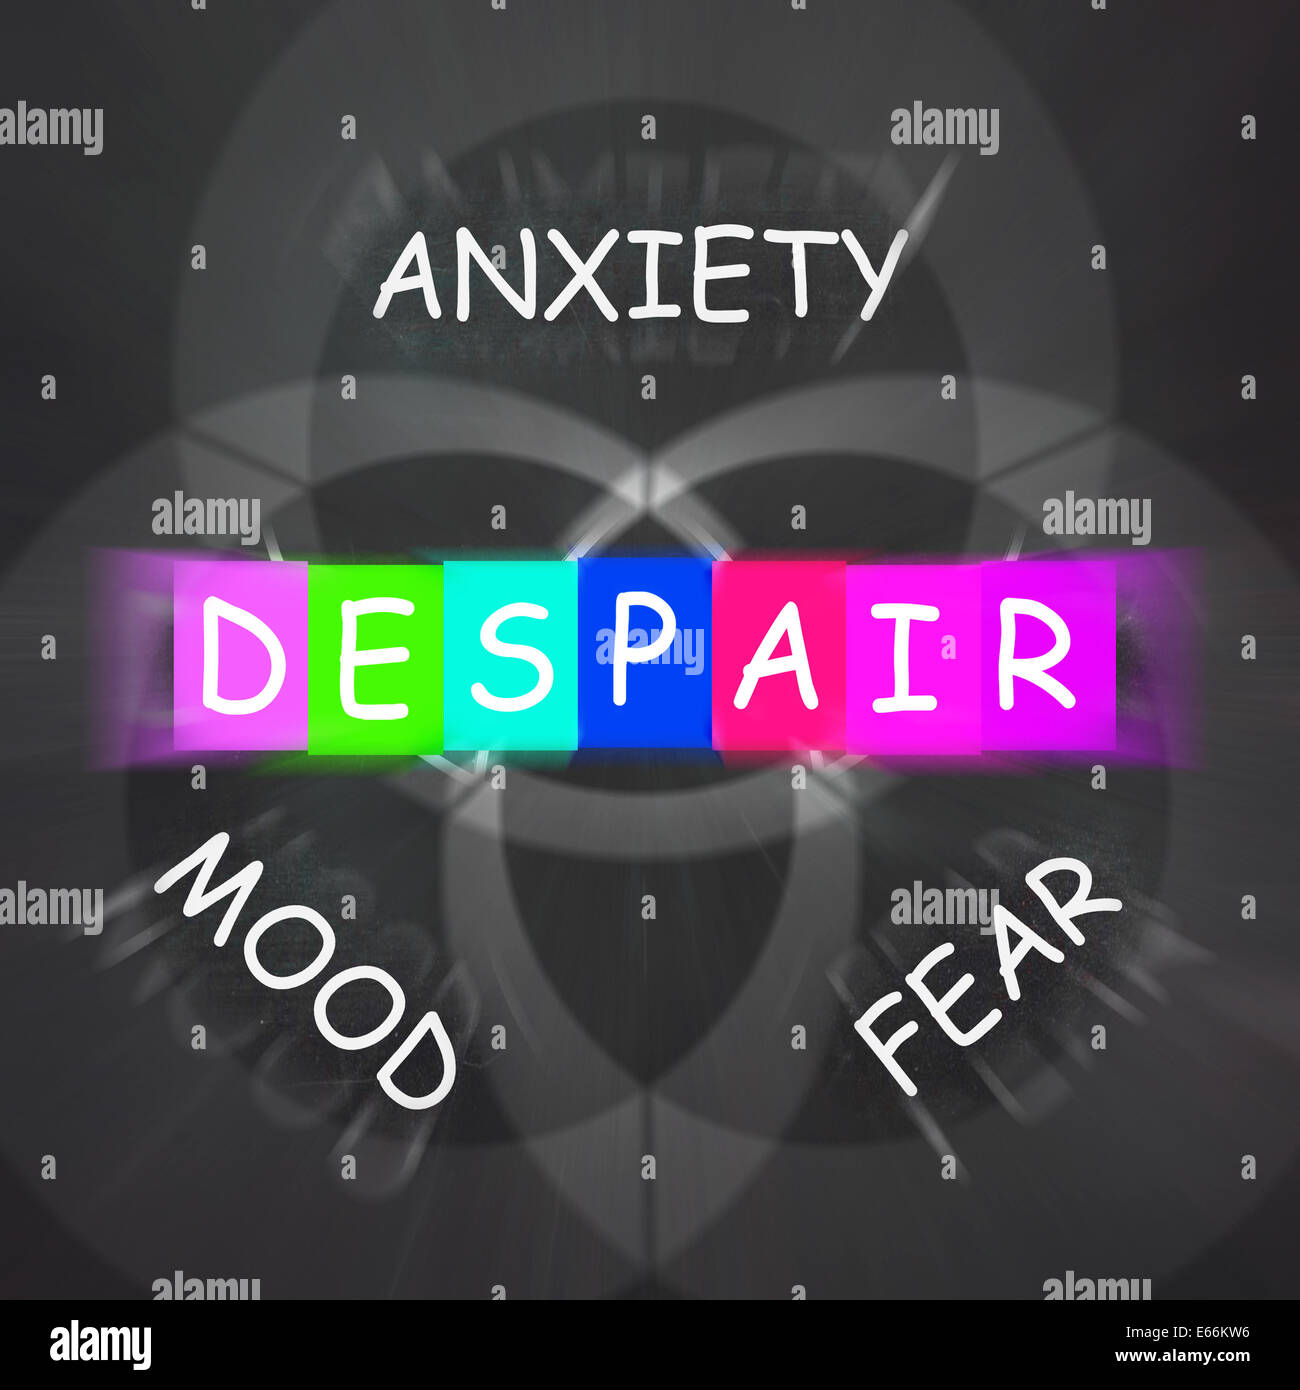 Despair Displaying a Mood of Fear and Anxiety Stock Photo